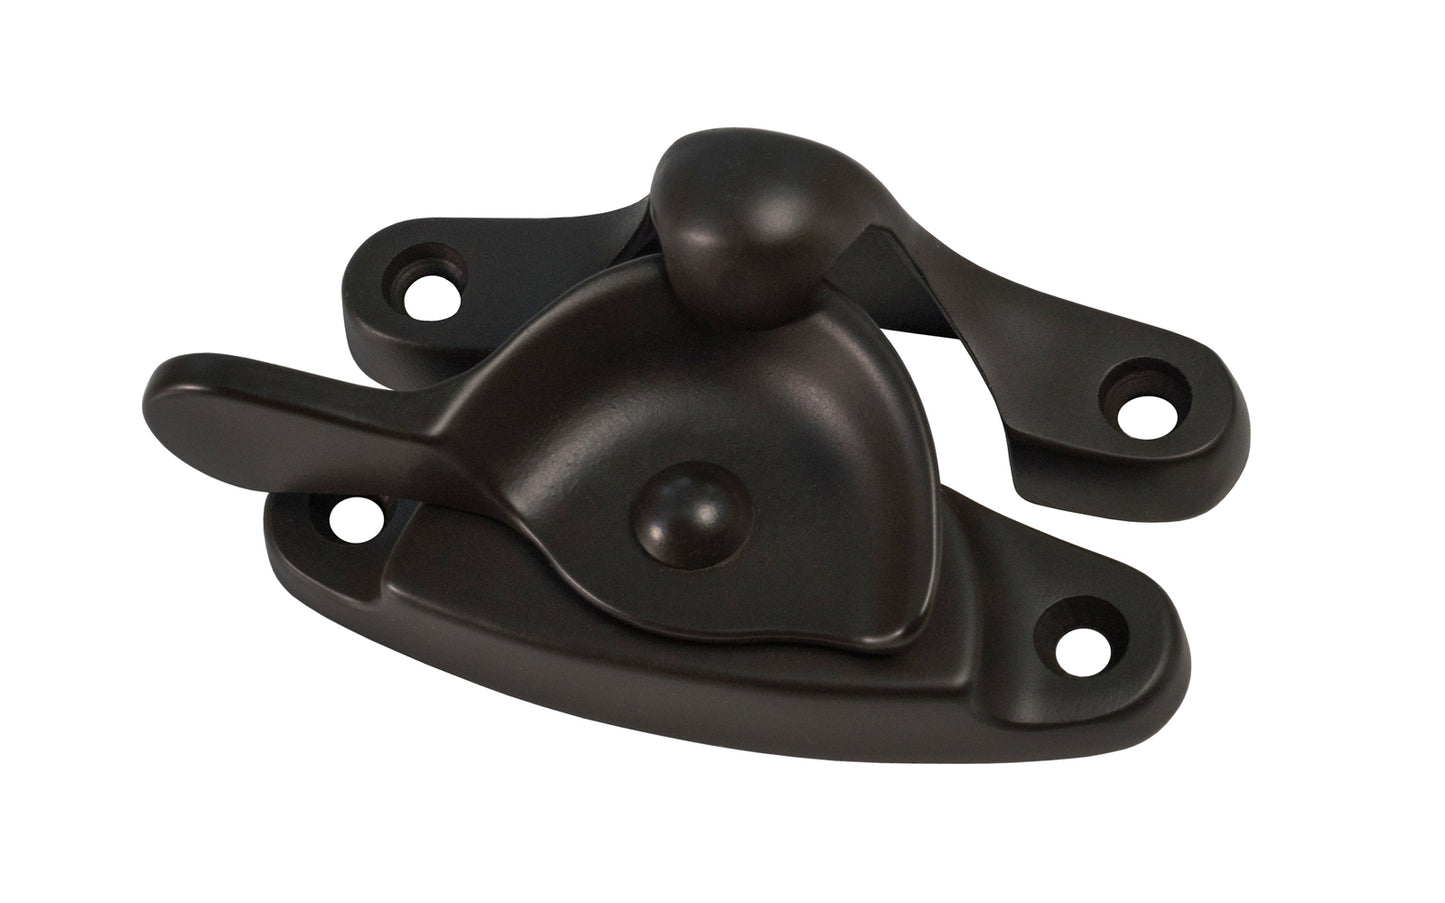 High quality & very popular classic solid brass crescent-style sash lock designed for hung or sash windows. Solid brass material with a durable pivot turn. 2-7/8" x 1" Large Size Lock. Oil Rubbed Bronze Finish.